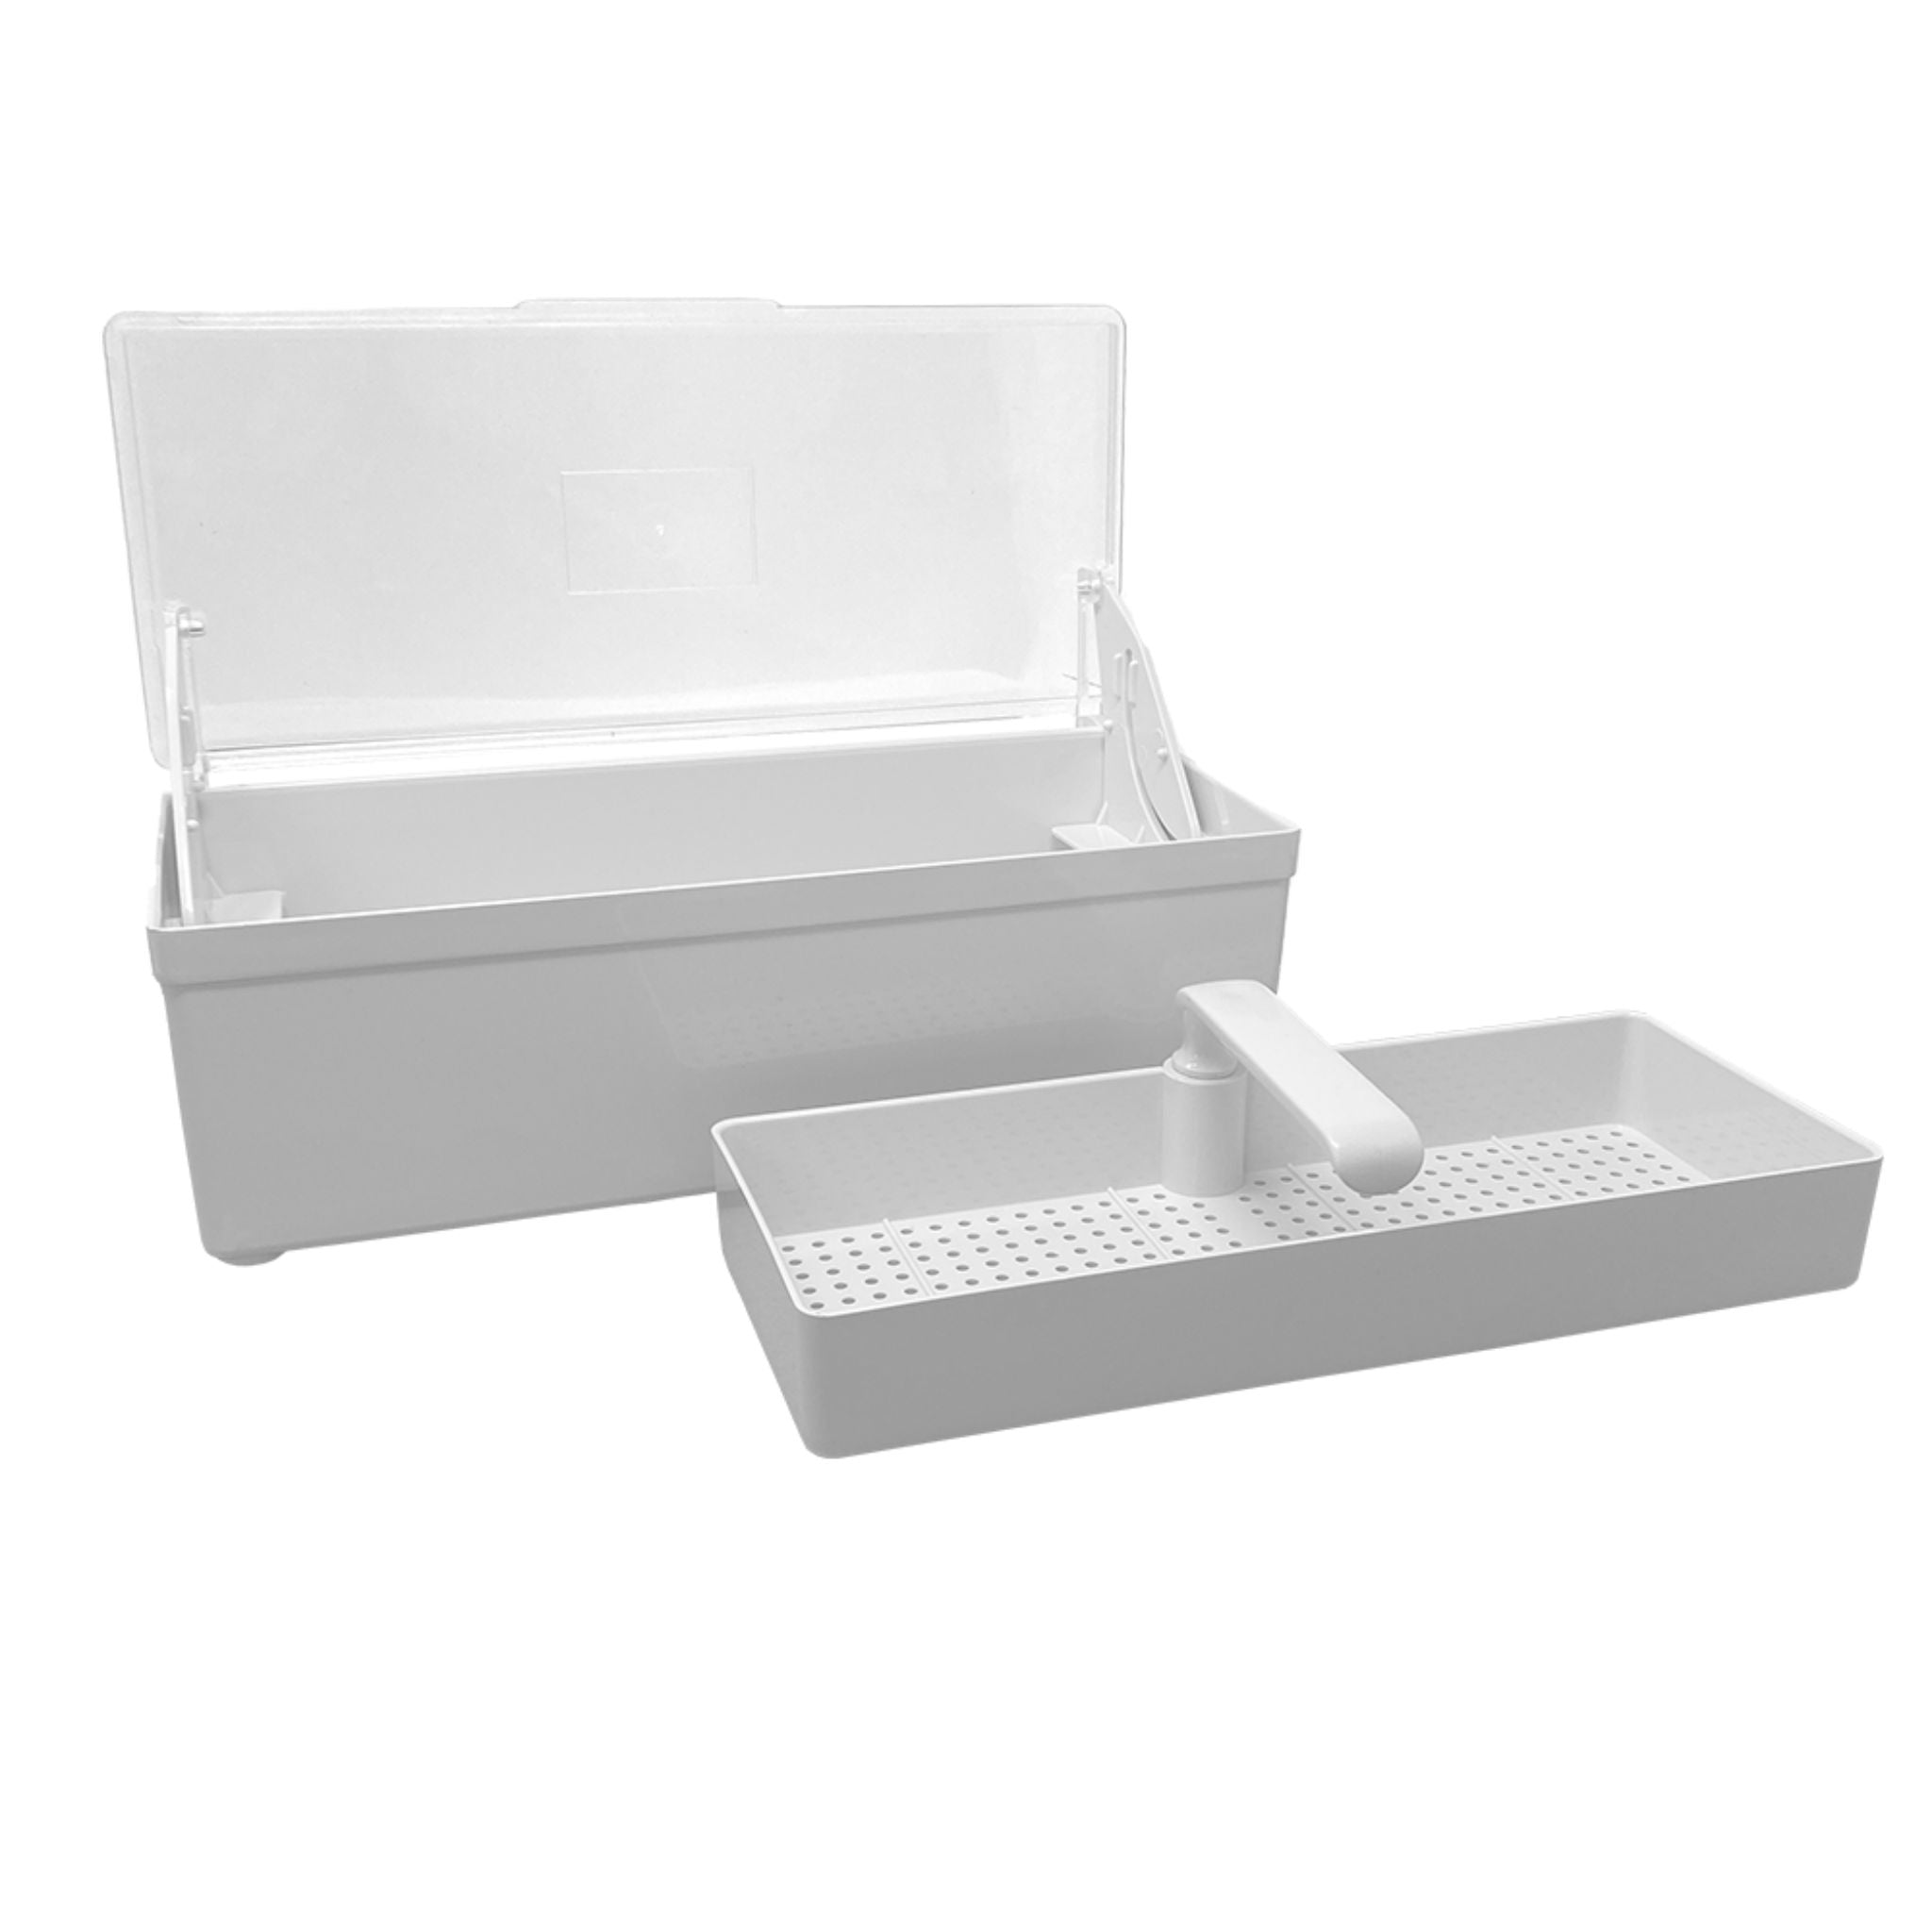 Disinfection tray for instruments